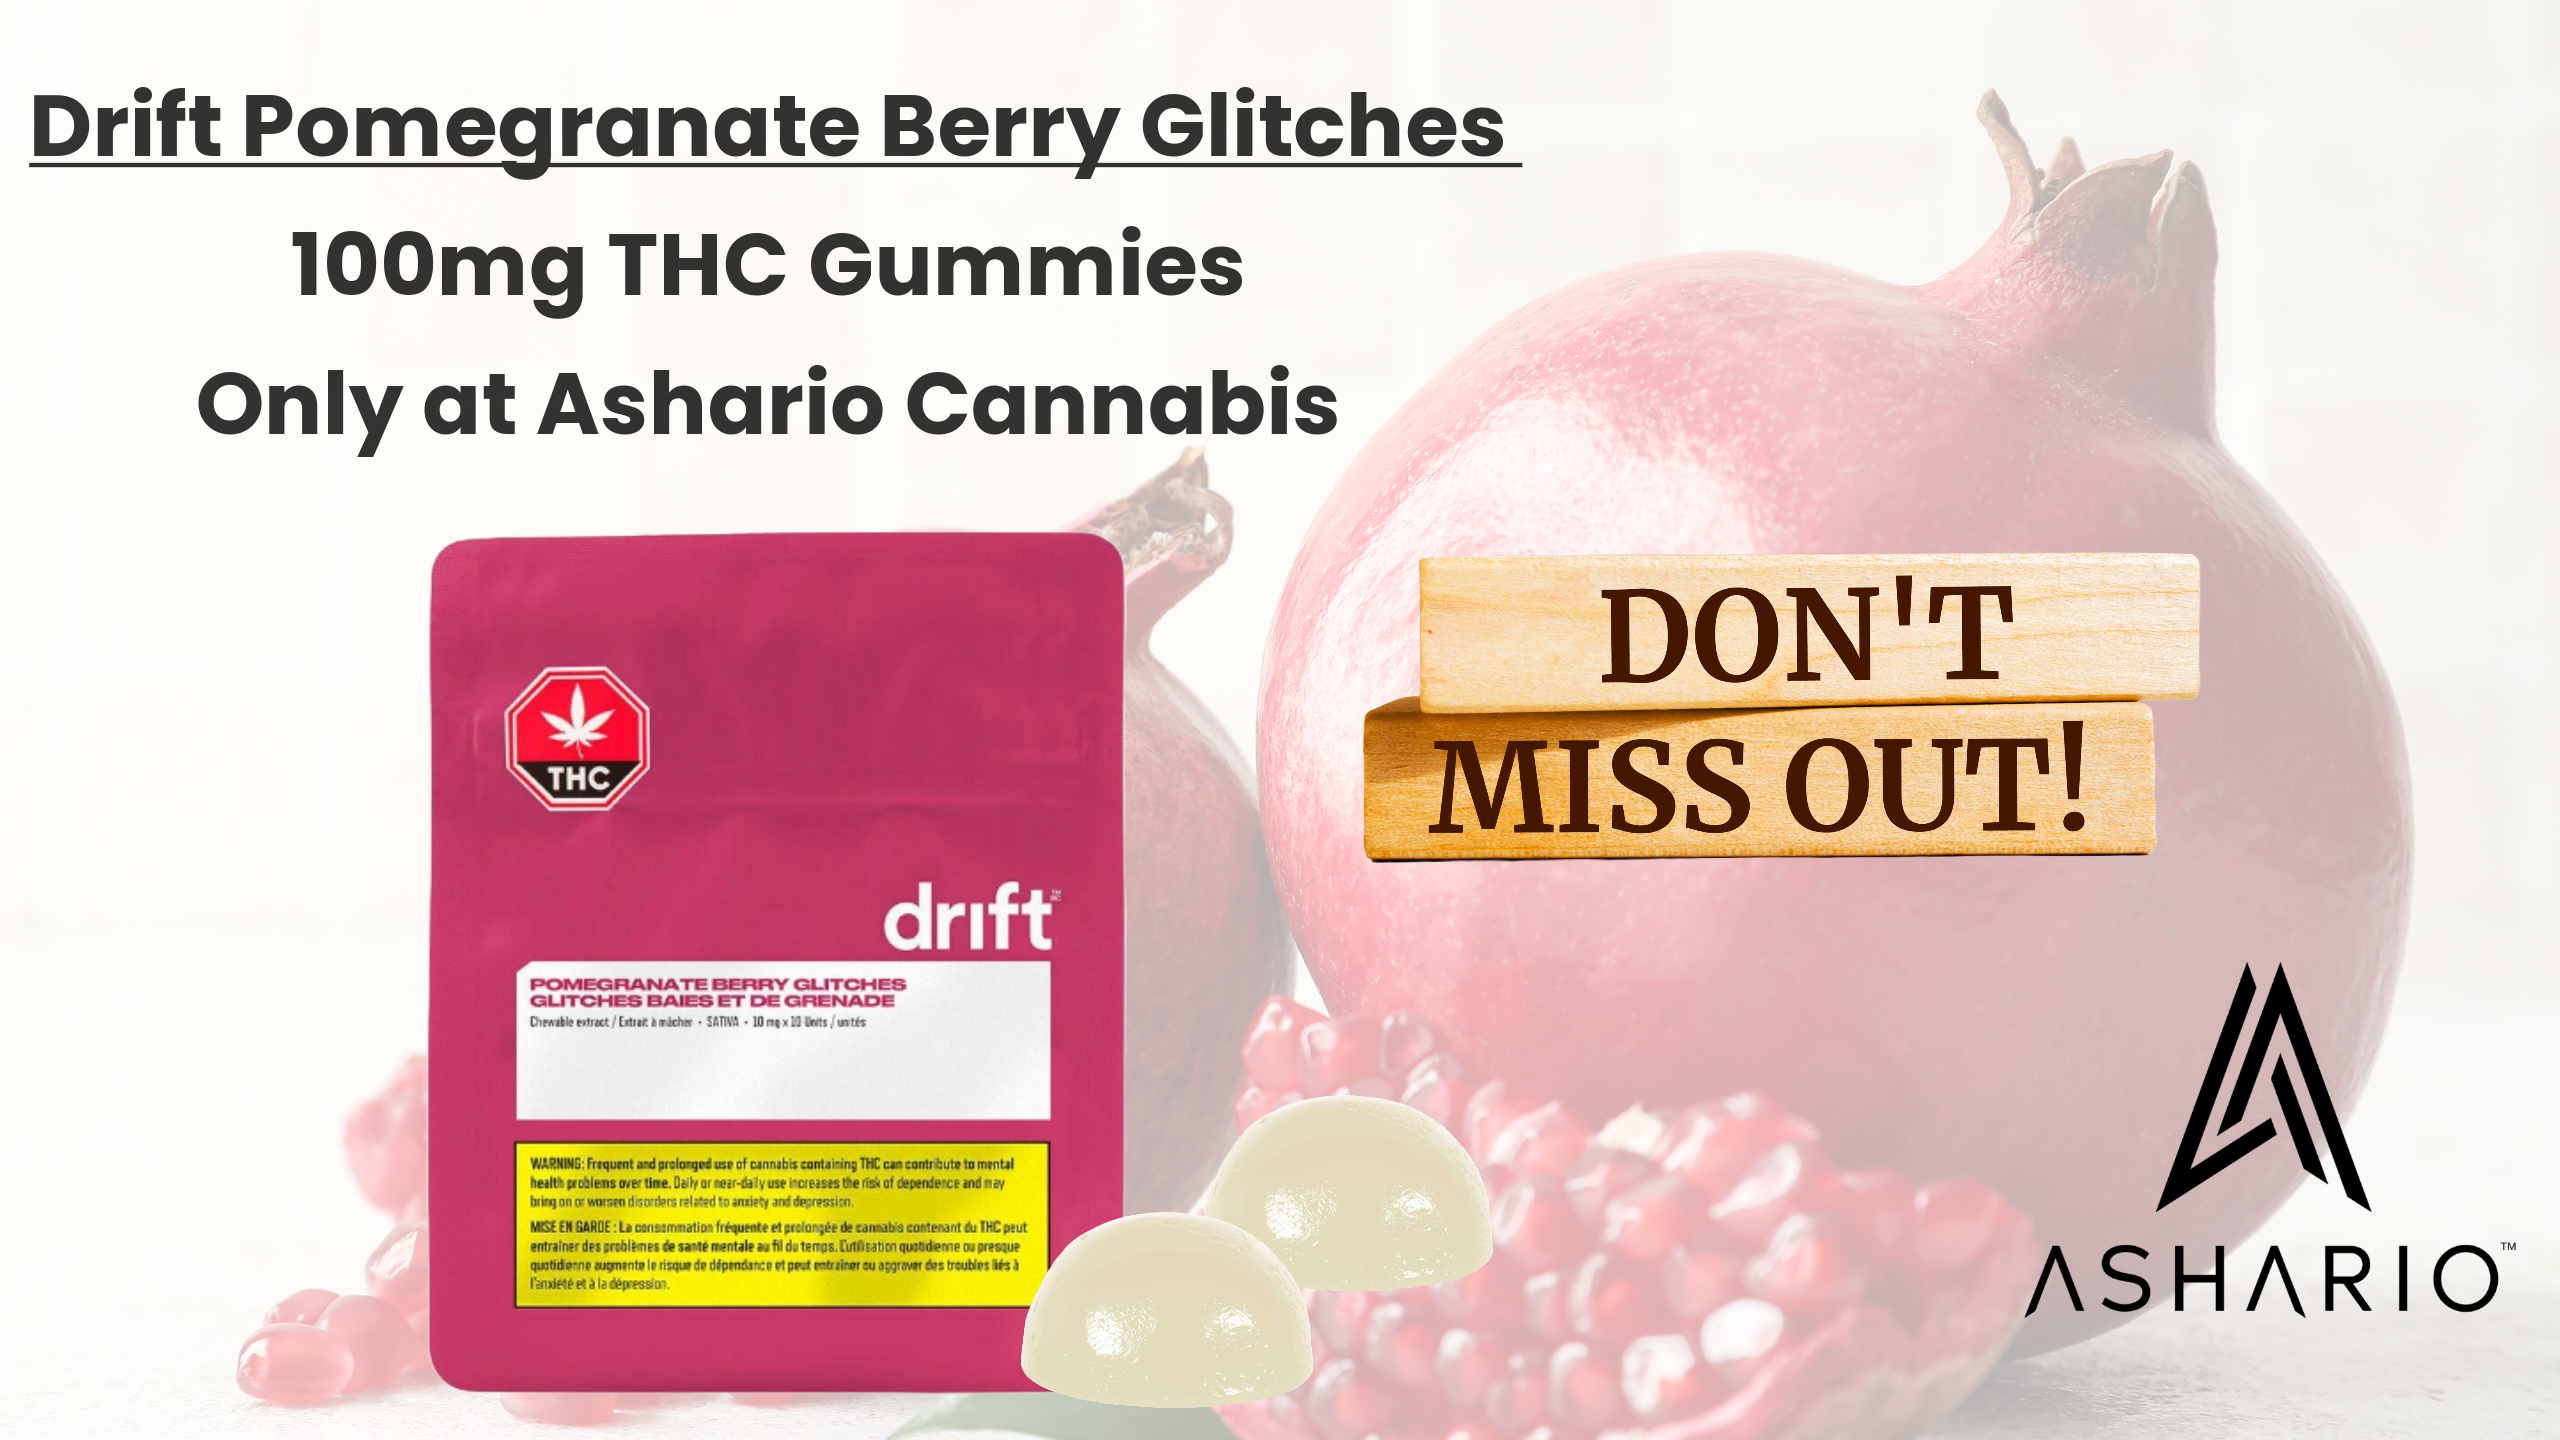 The Drift Pomegranate Berry Glitches 100mg THC Gummies: A Tantalizing Treat Soon to be a Rarity